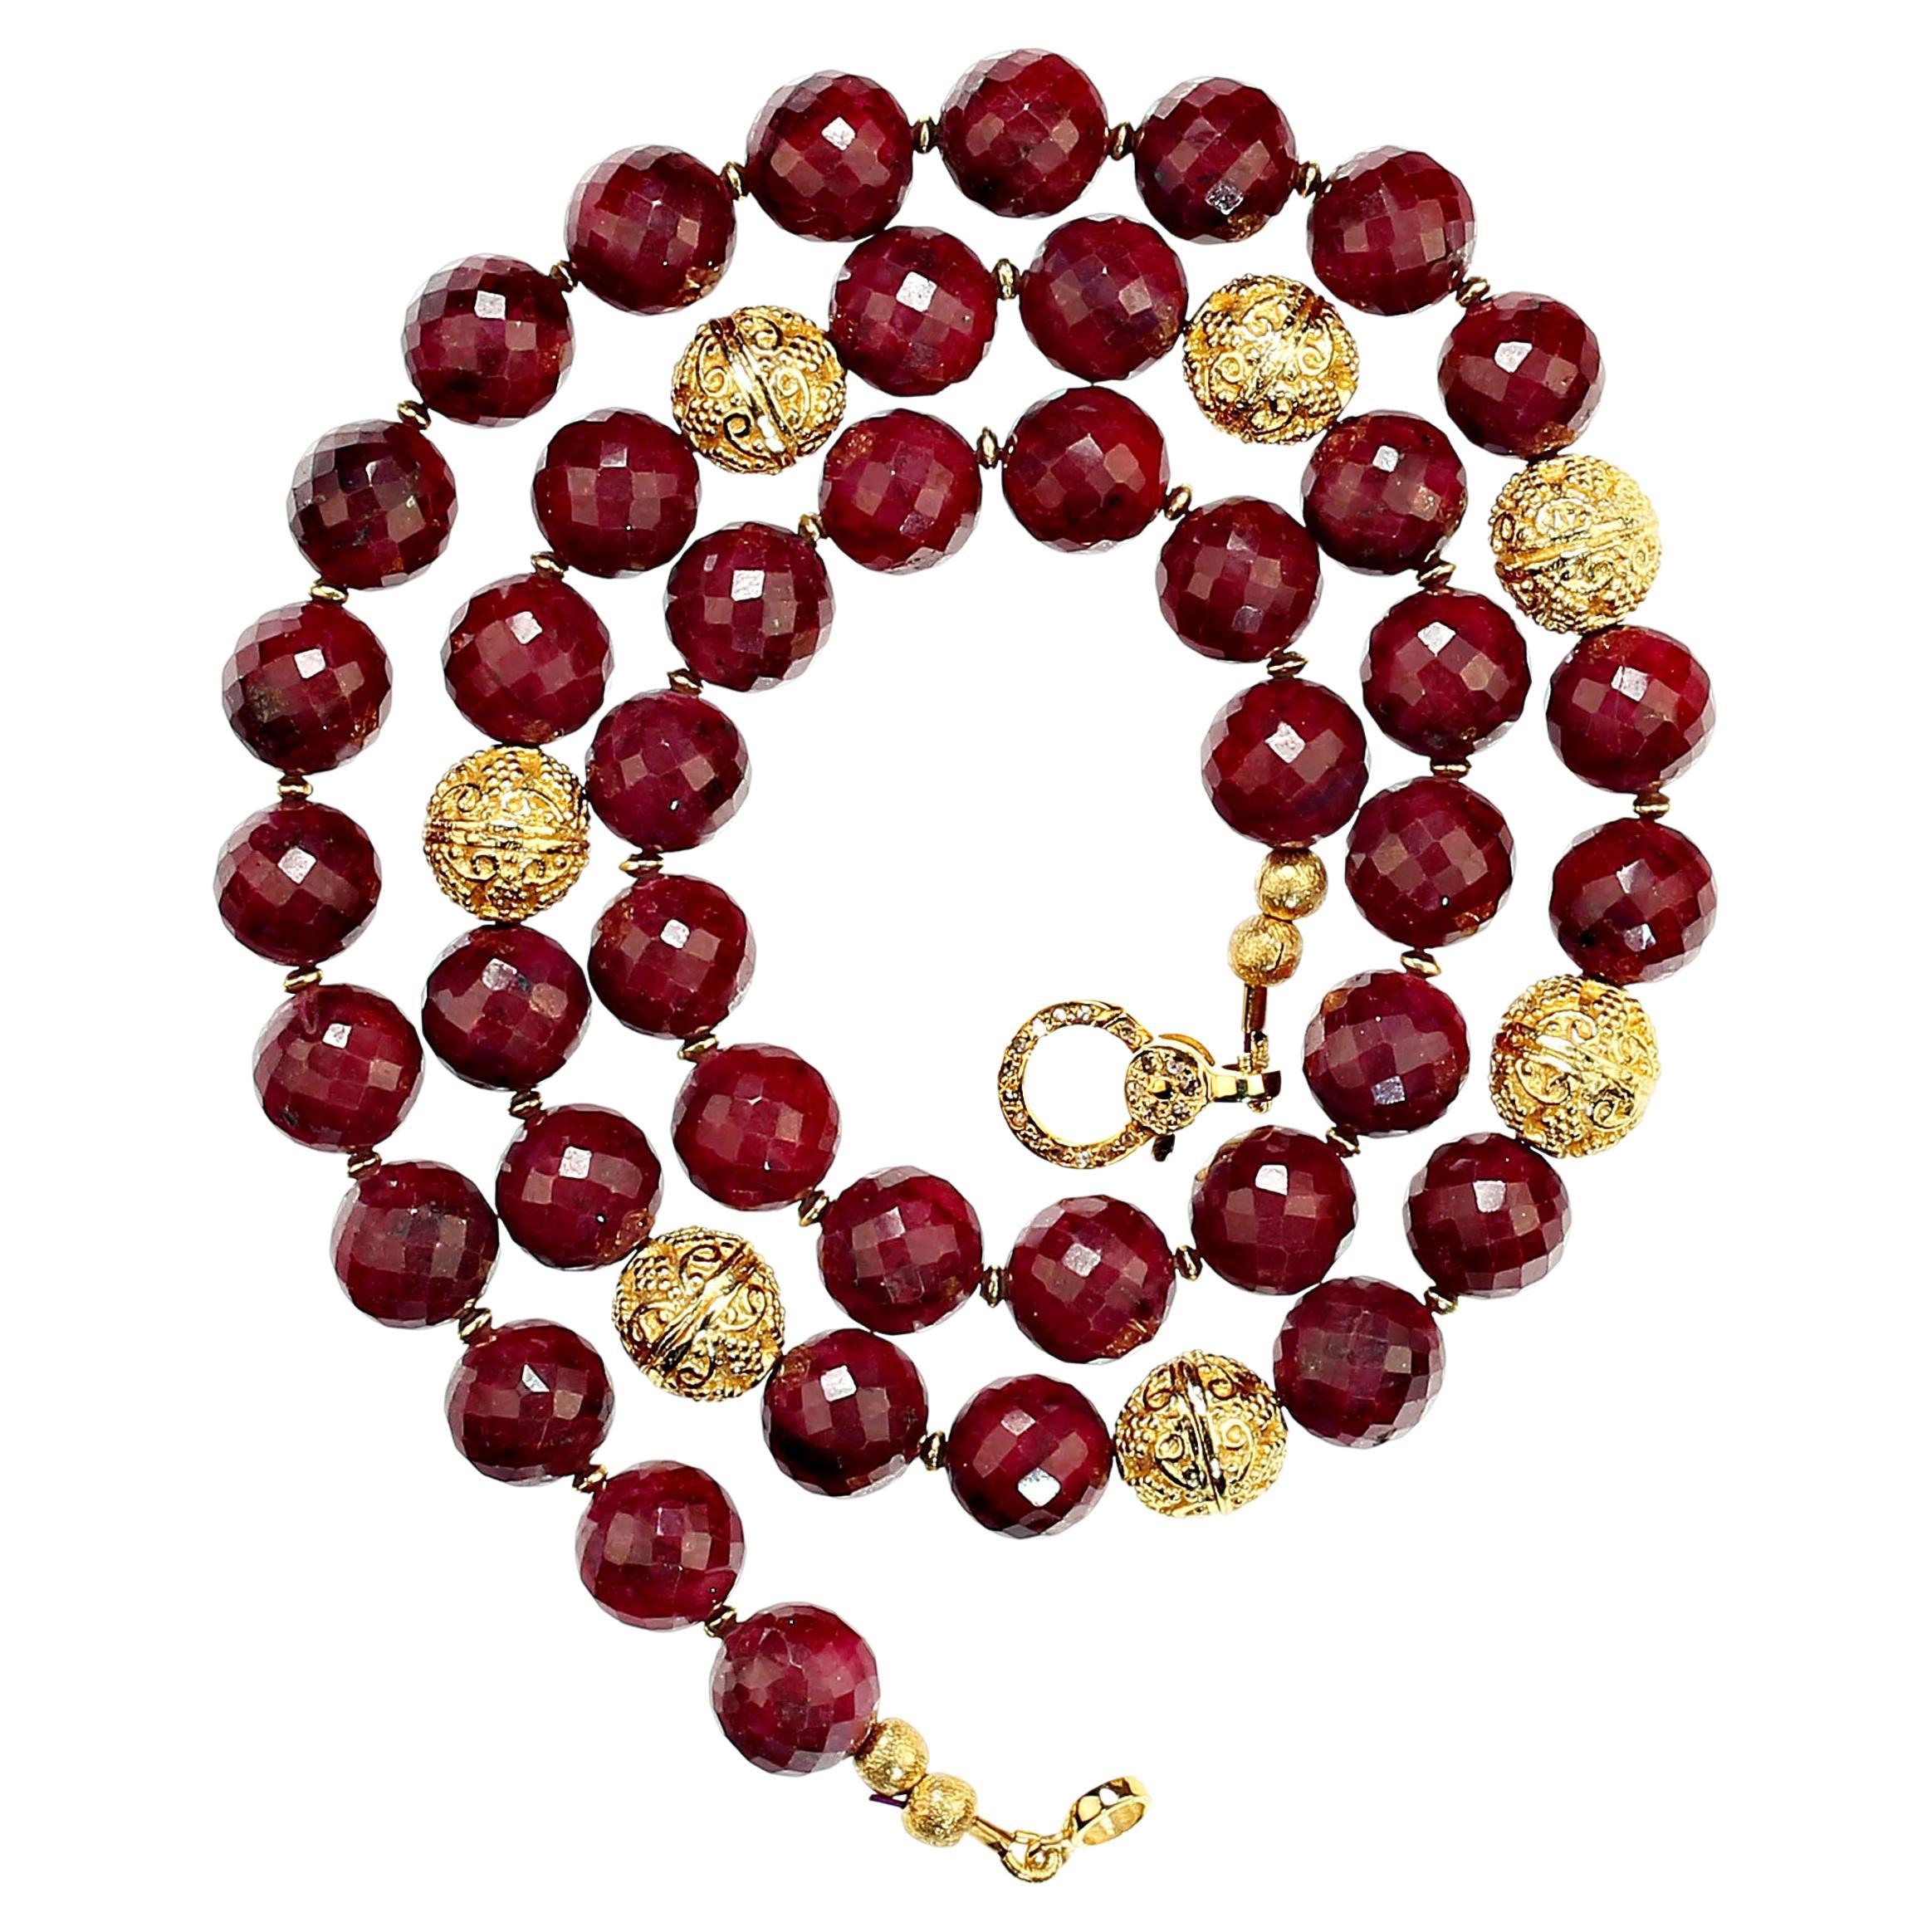 21 Inch necklace of faceted ruby, 9.5mm, with goldy accents.  The gorgeous necklace is just perfect for all you RUBY lovers. These lovely gems are secured with a gold vermeil clasp sparkling with diamonds. MN2308